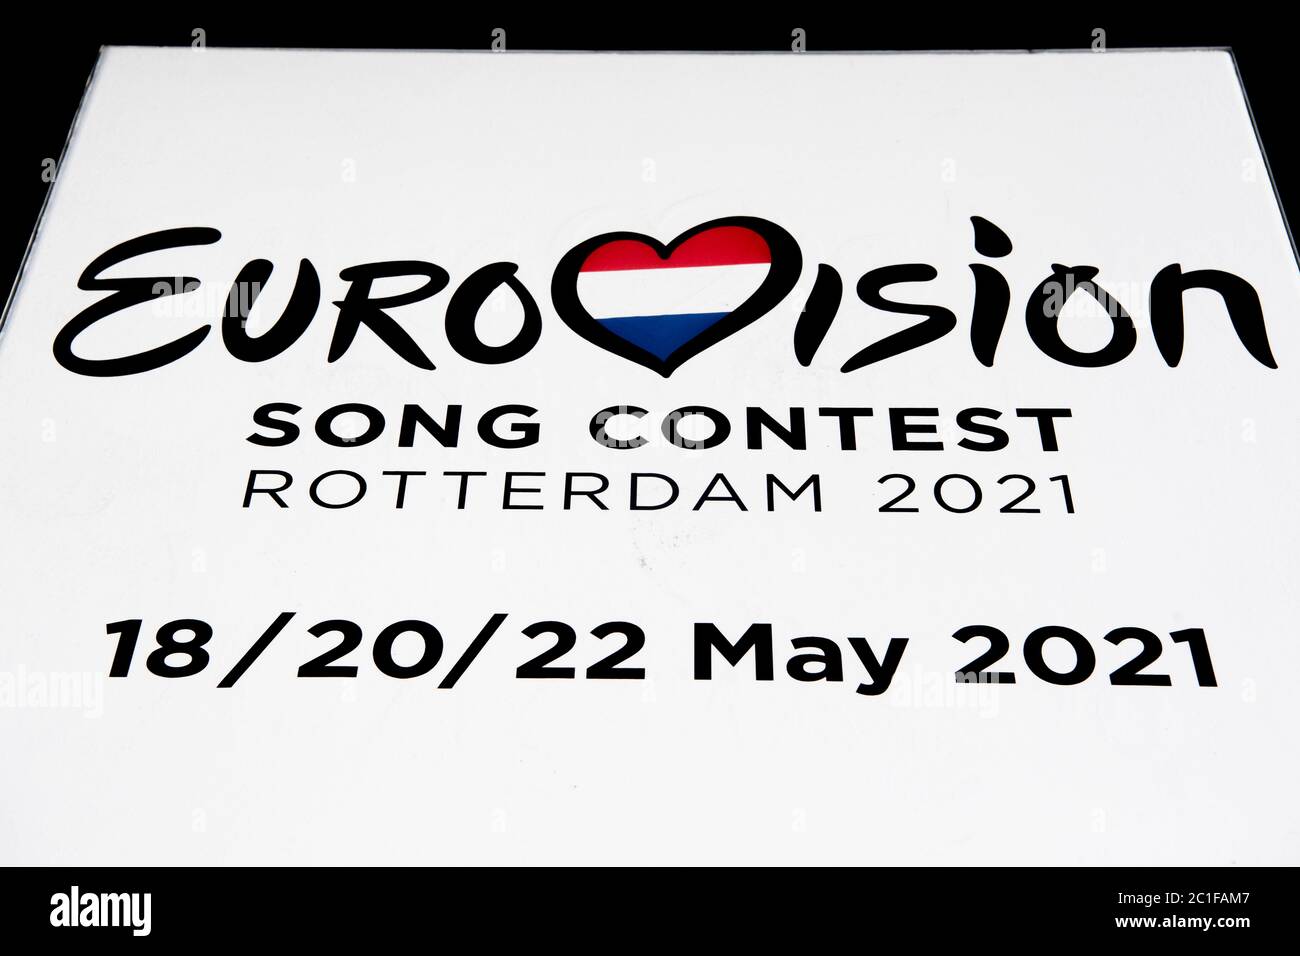 The reveal of the new date for the Eurovision Song Contest 2021 in front of  Rotterdam Ahoy.The Eurovision Song Contest in 2021 will take place in the  third week of May. The